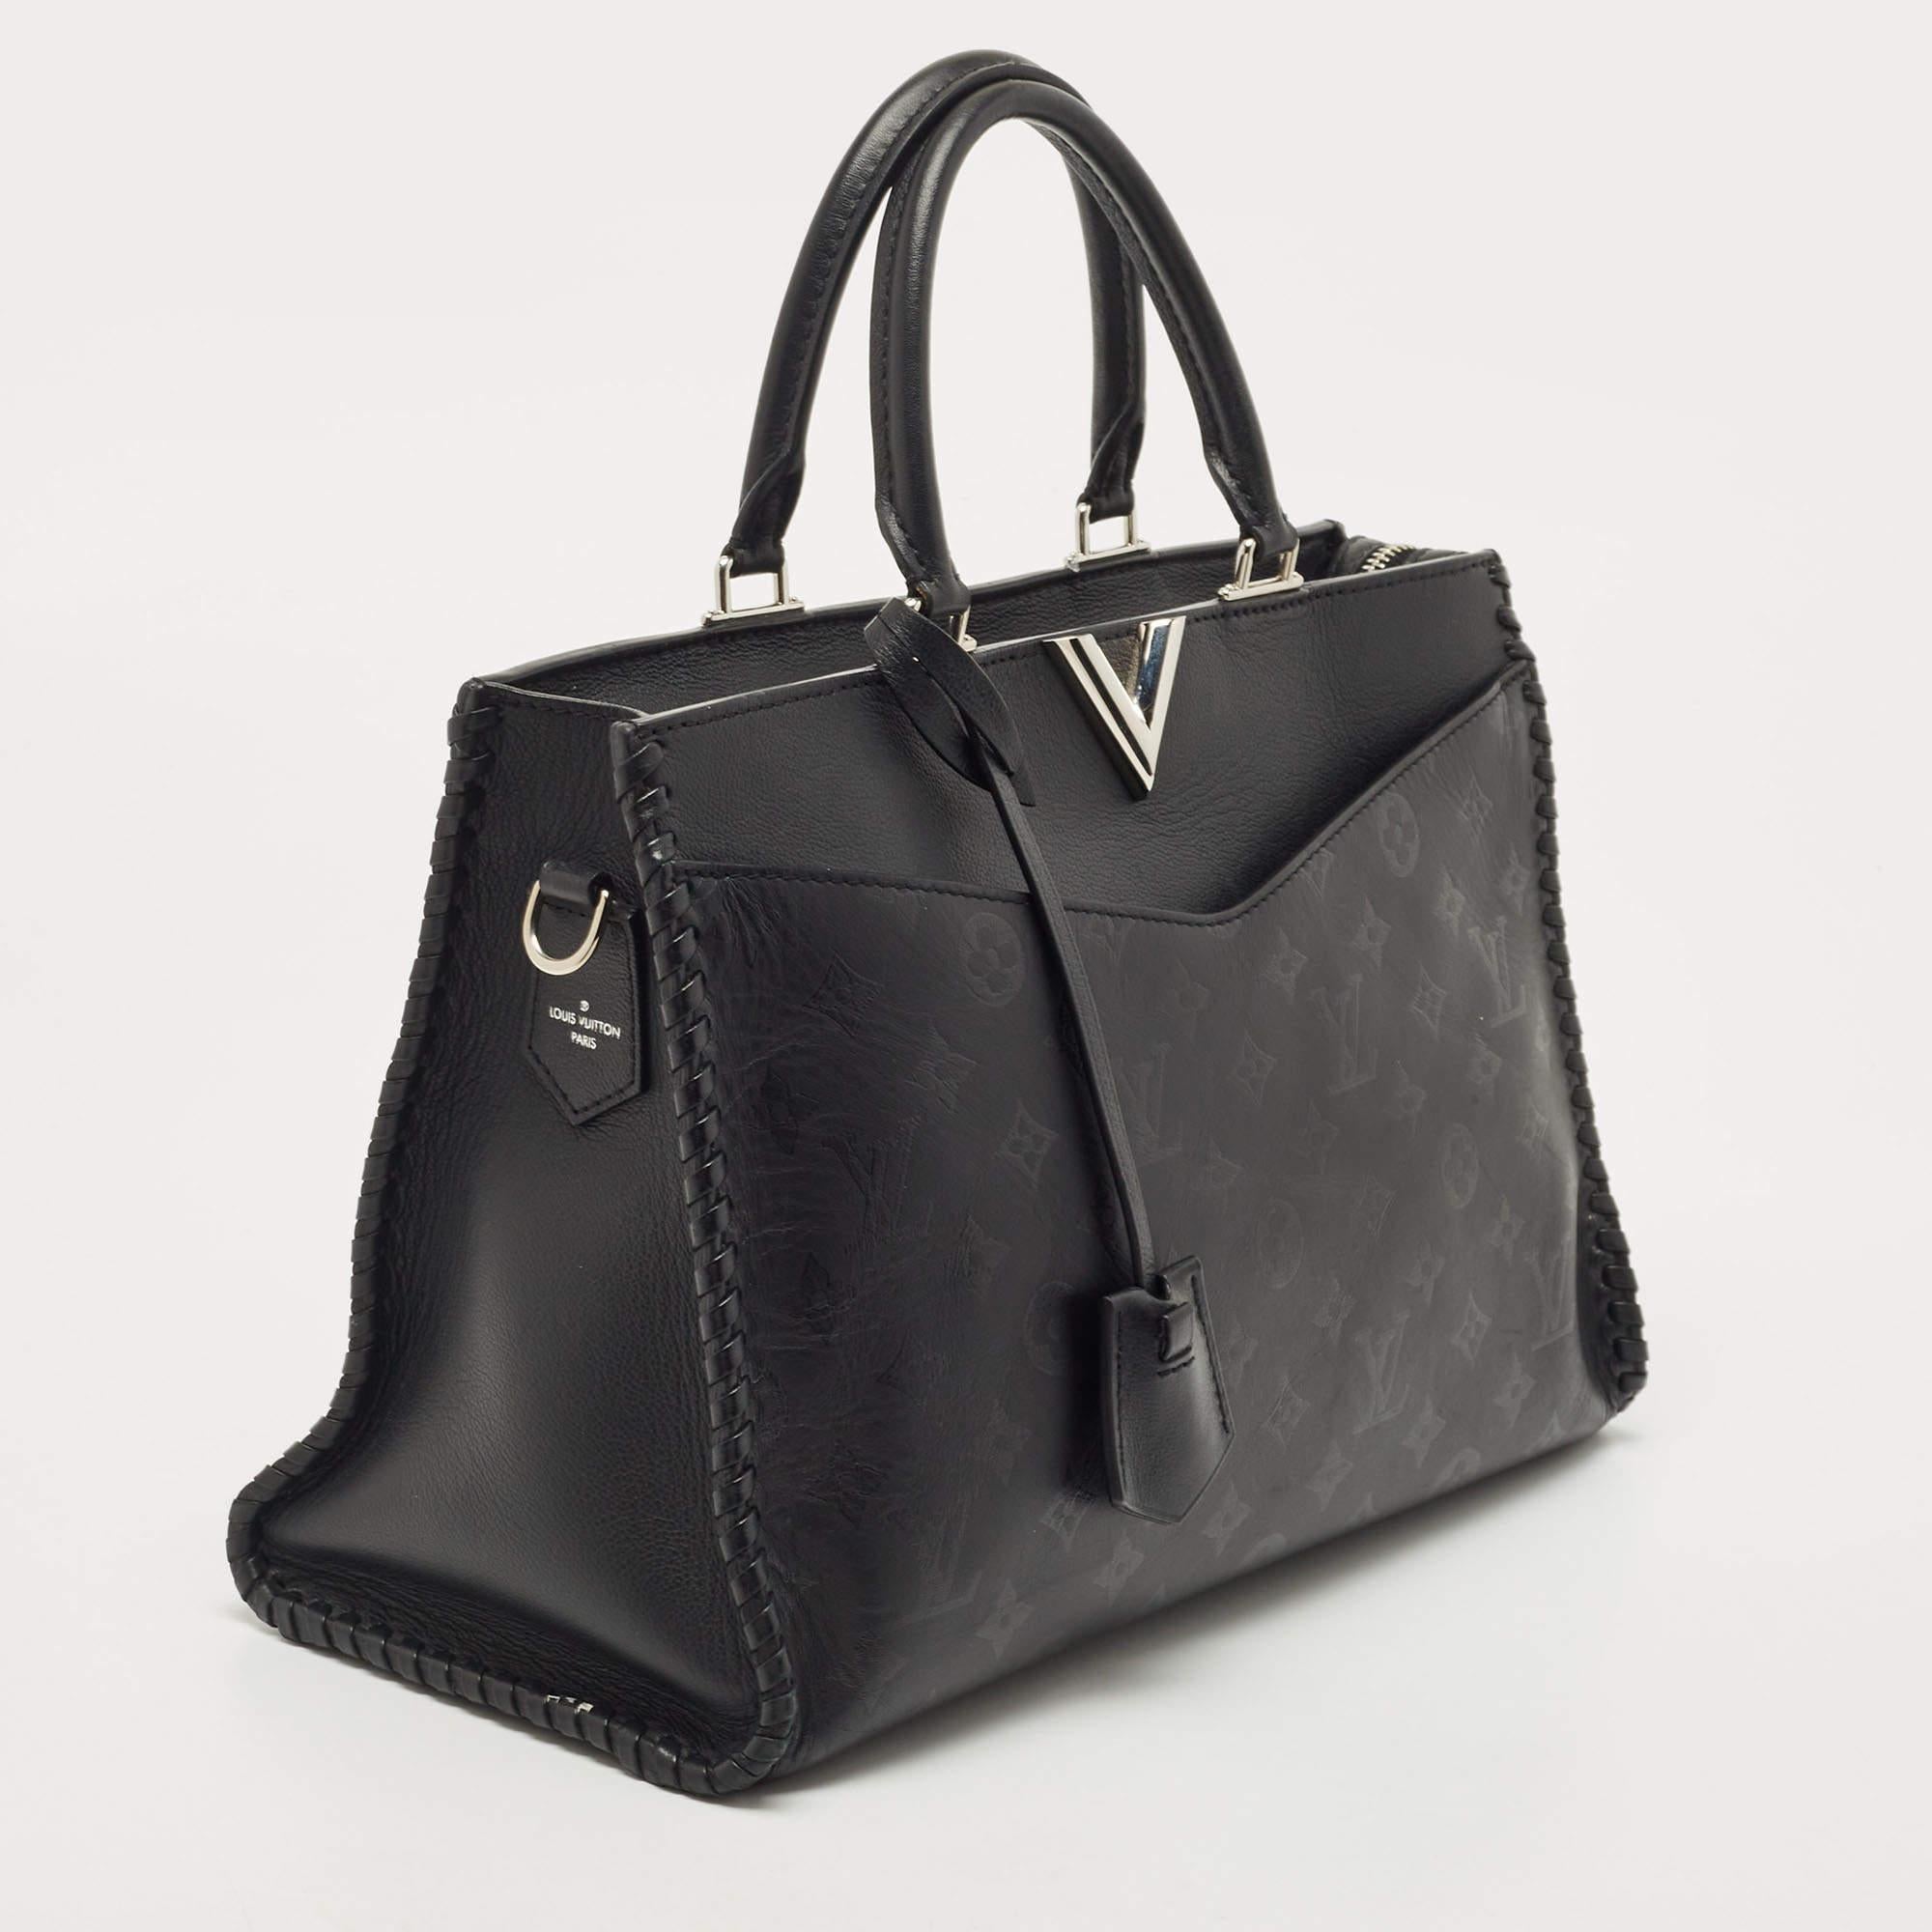 Women's Louis Vuitton Black Monogram Cuir Plume Leather Very Zipped Tote